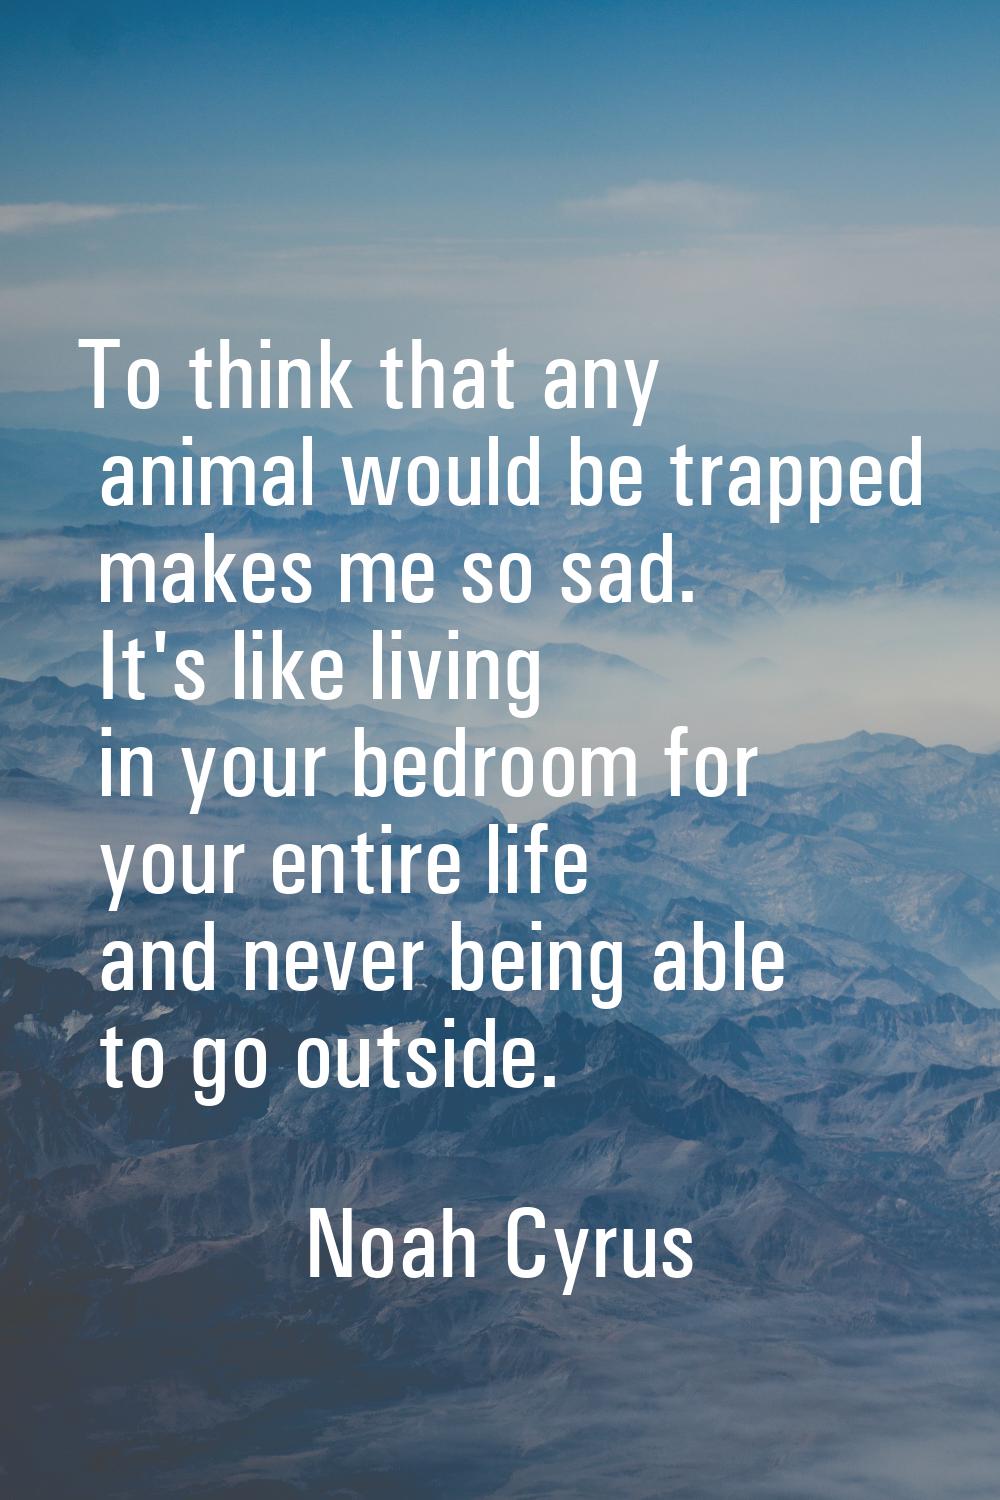 To think that any animal would be trapped makes me so sad. It's like living in your bedroom for you